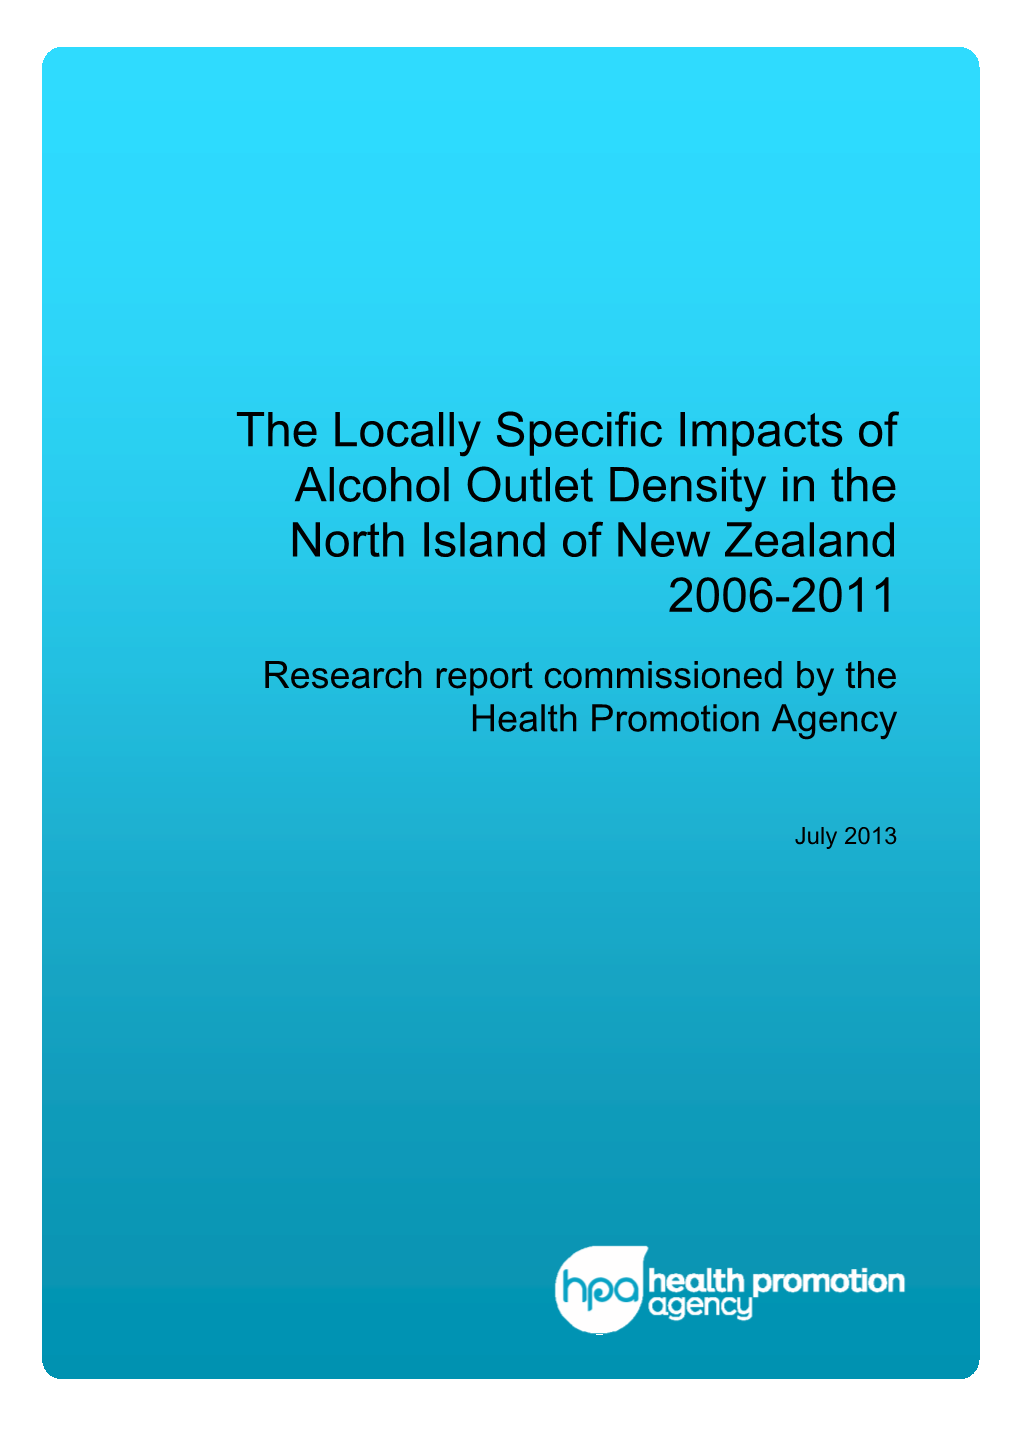 The Locally Specific Impacts of Alcohol Outlet Density in the North Island of New Zealand 2006-2011 Research Report Commissioned by the Health Promotion Agency